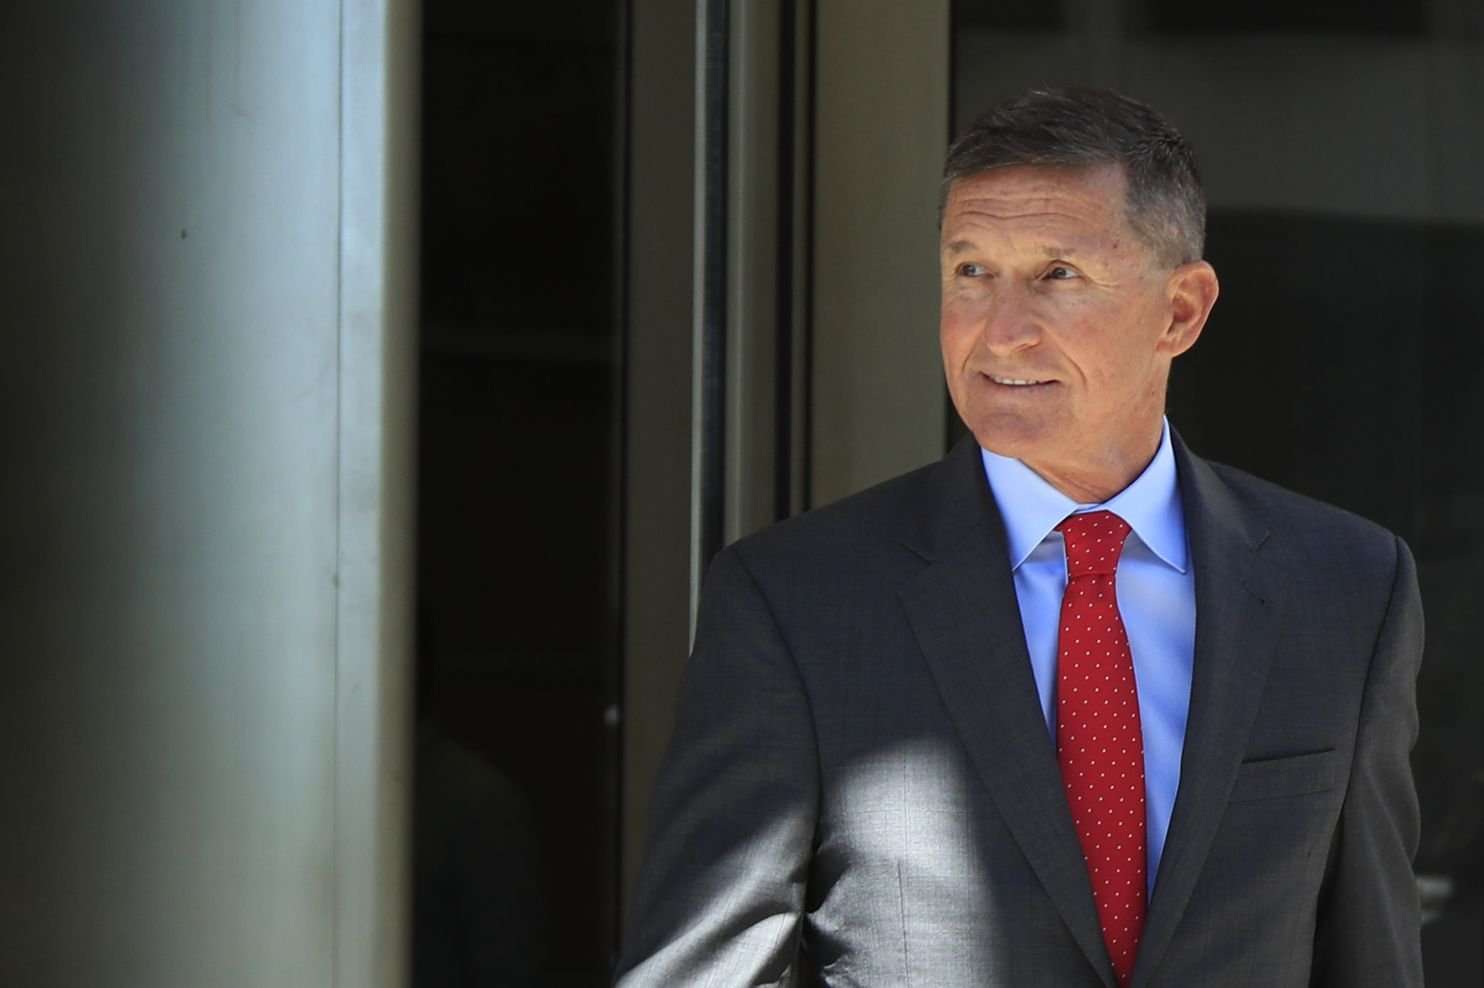 image for Michael Flynn’s business partner charged with illegally lobbying for Turkey